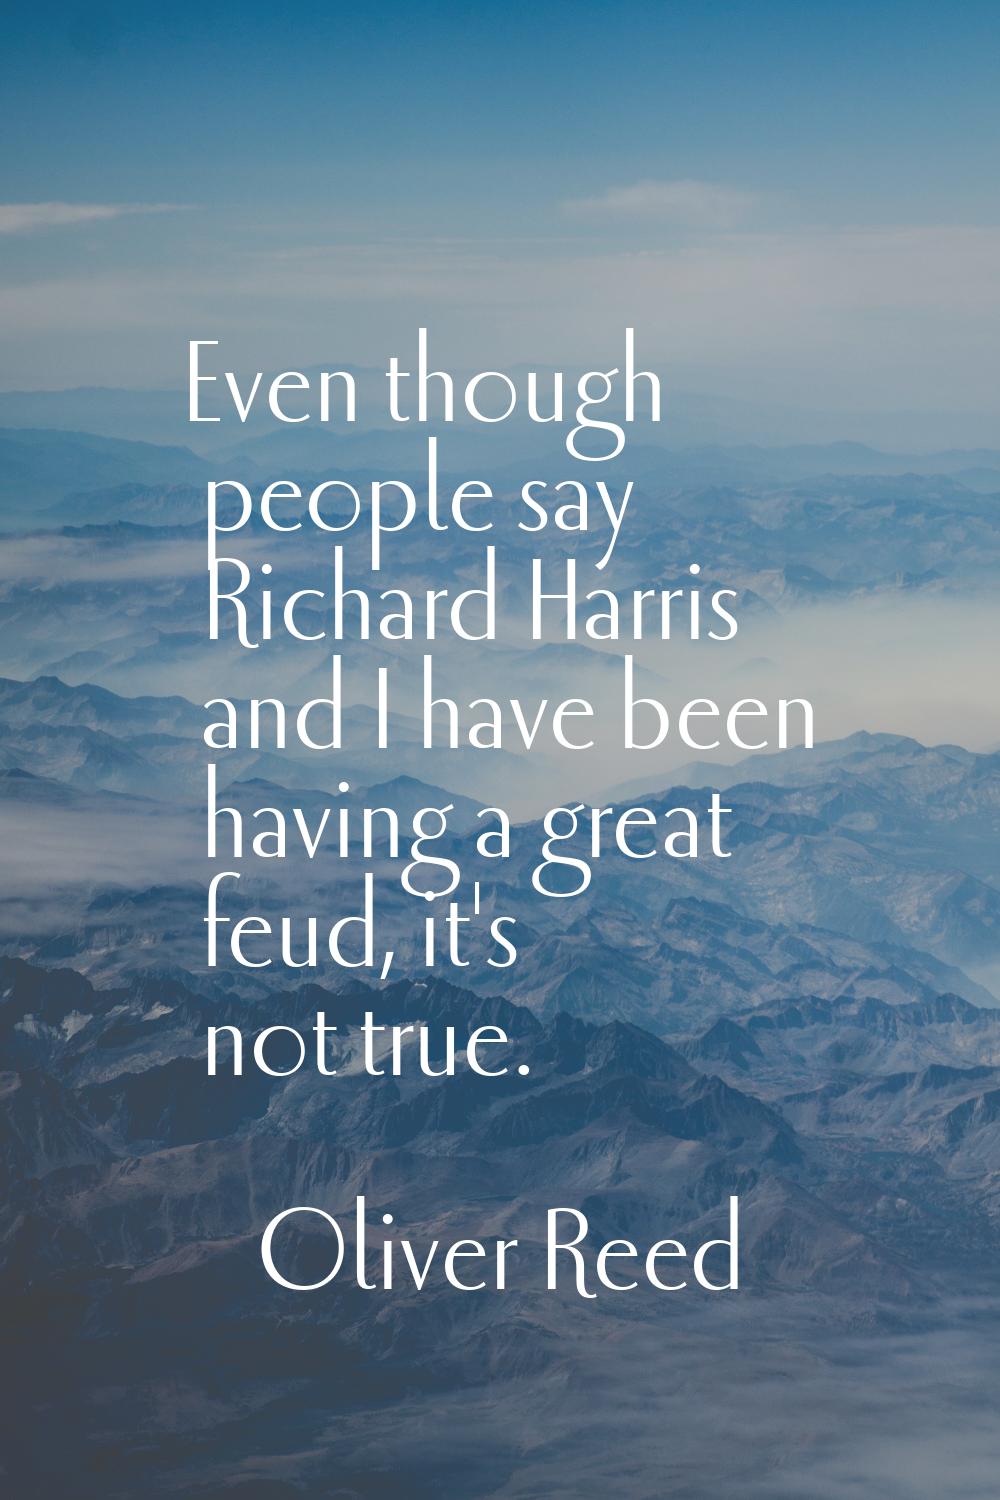 Even though people say Richard Harris and I have been having a great feud, it's not true.